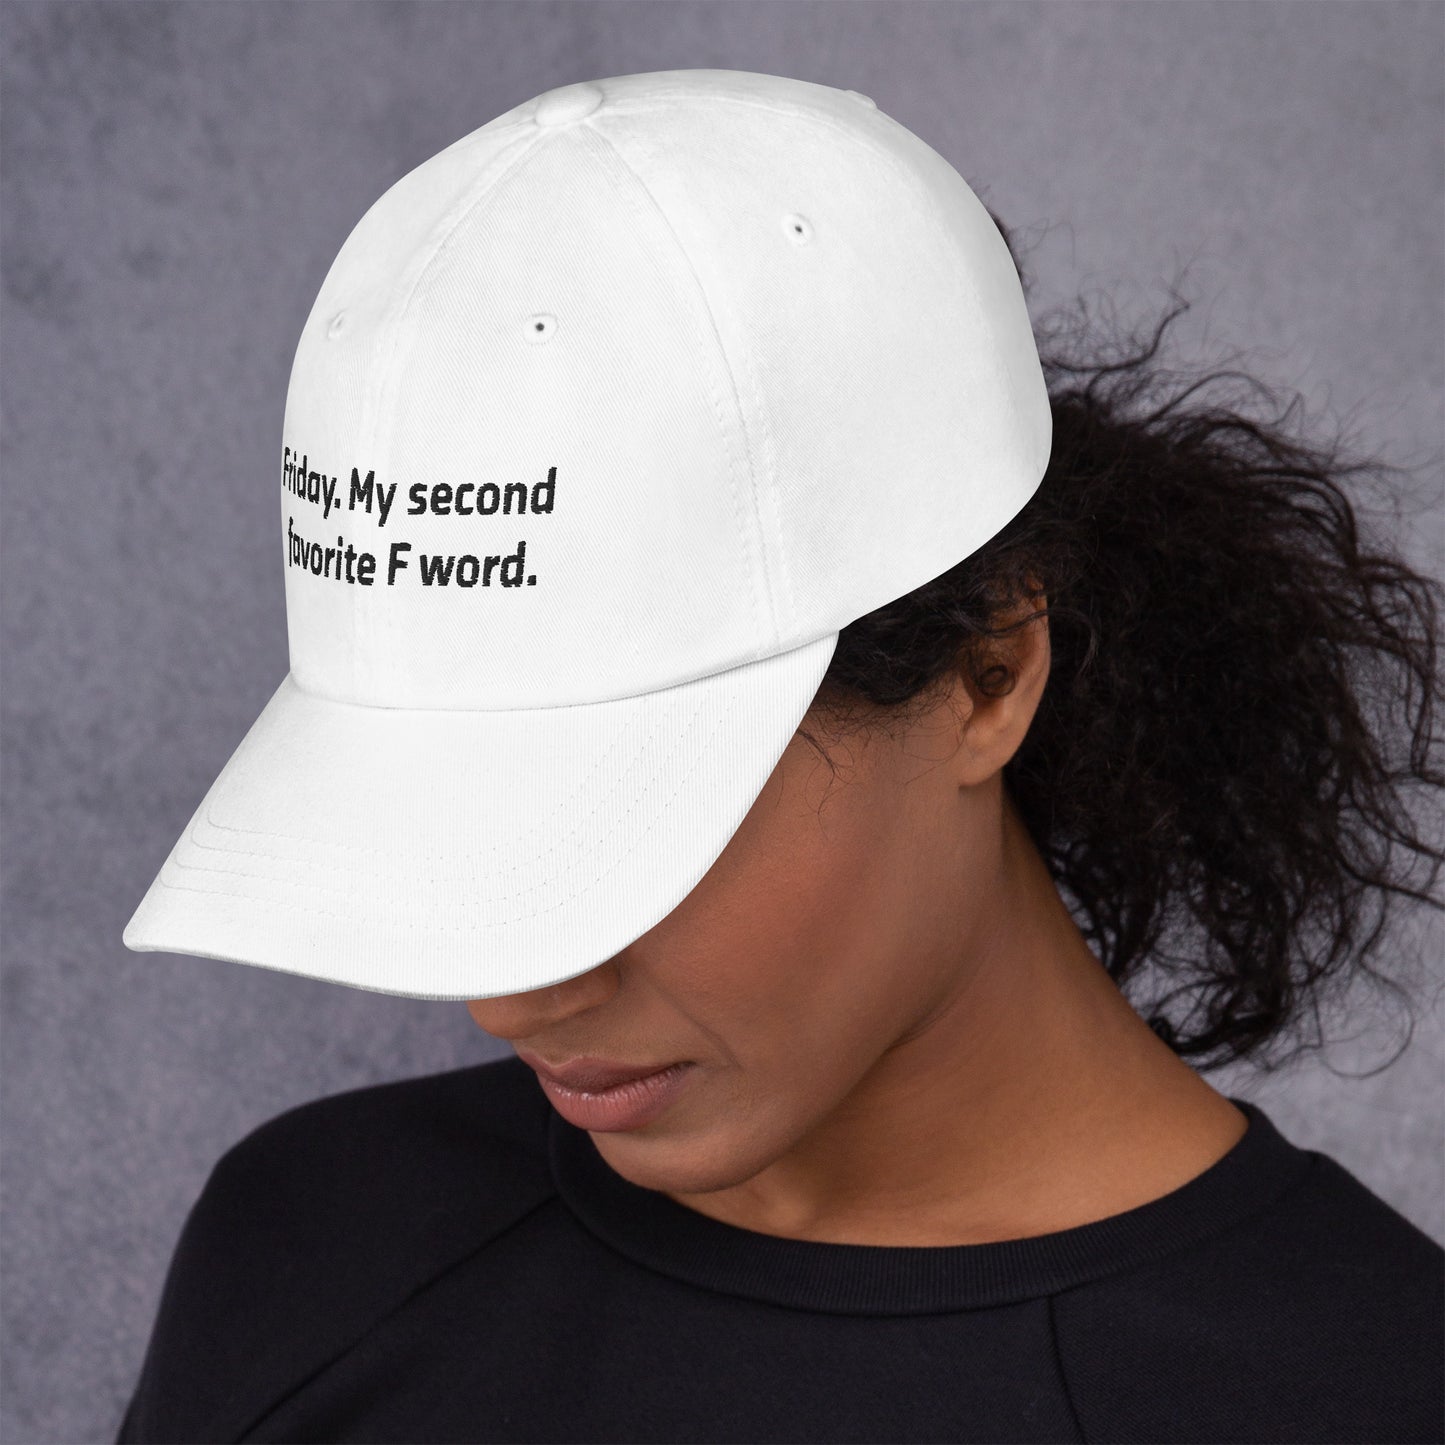 Friday, my second favorite F word Dad hat